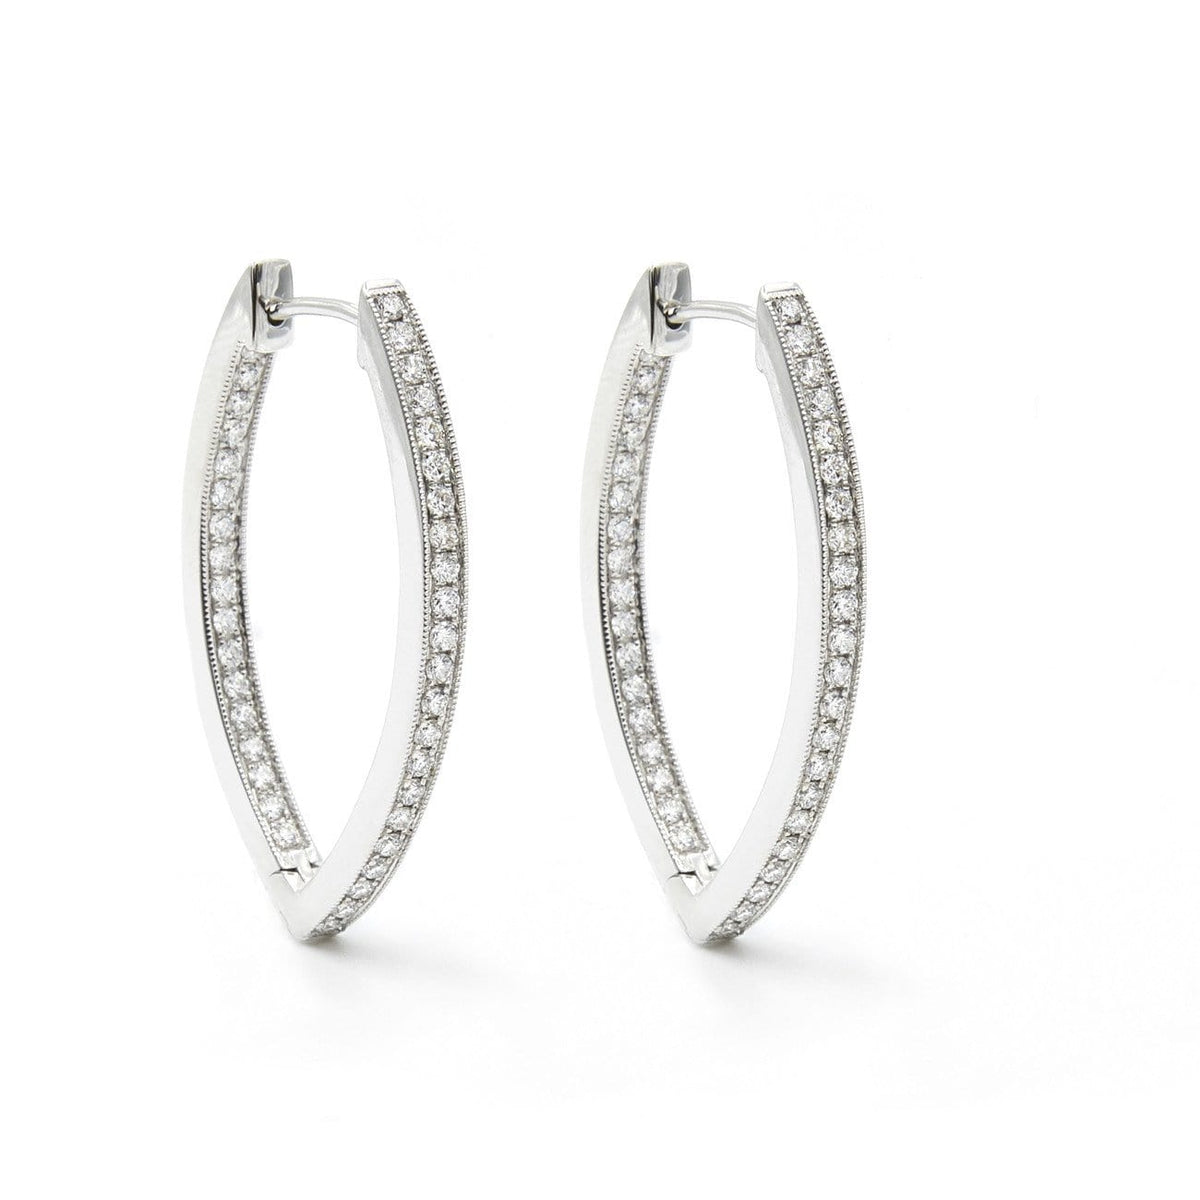 MARQUIS-DIAMOND EARRINGS - Chris Aire Fine Jewelry & Timepieces